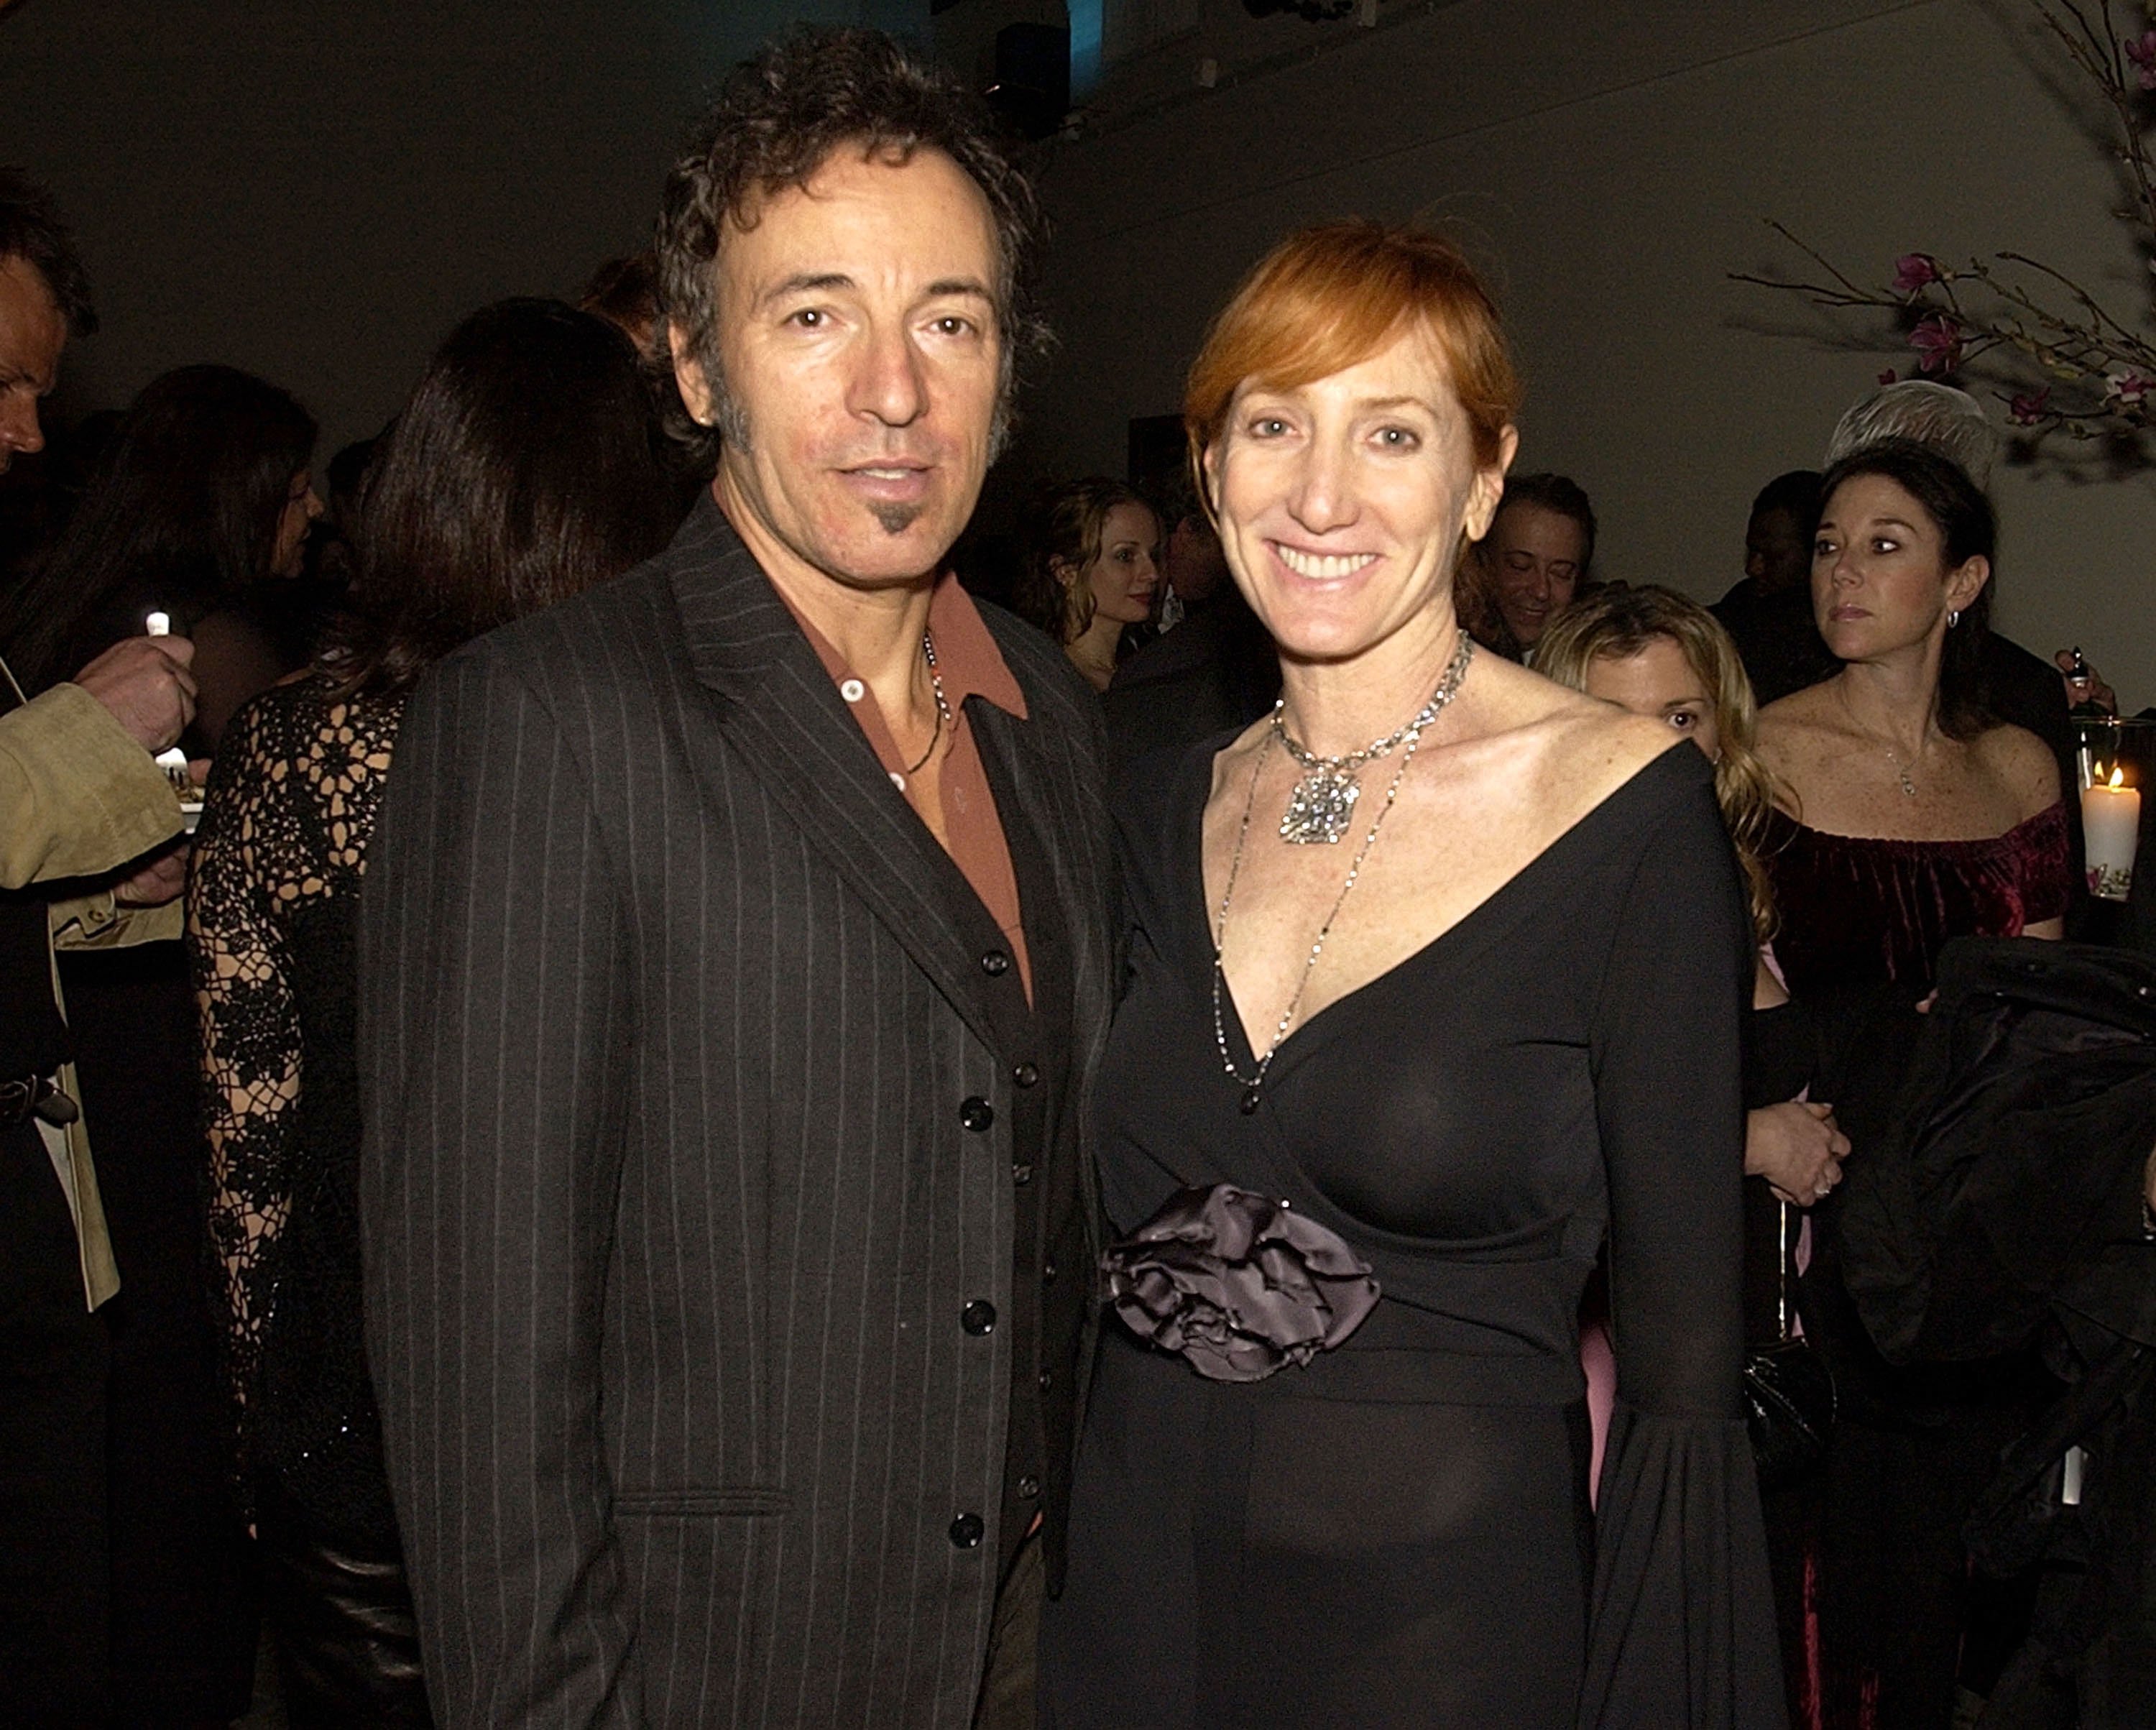 Bruce Springsteen and wife Patti Scialfa at Kristen Carr Benefit held at Bridgewater in New York, NY, United States. | Source: Getty Images